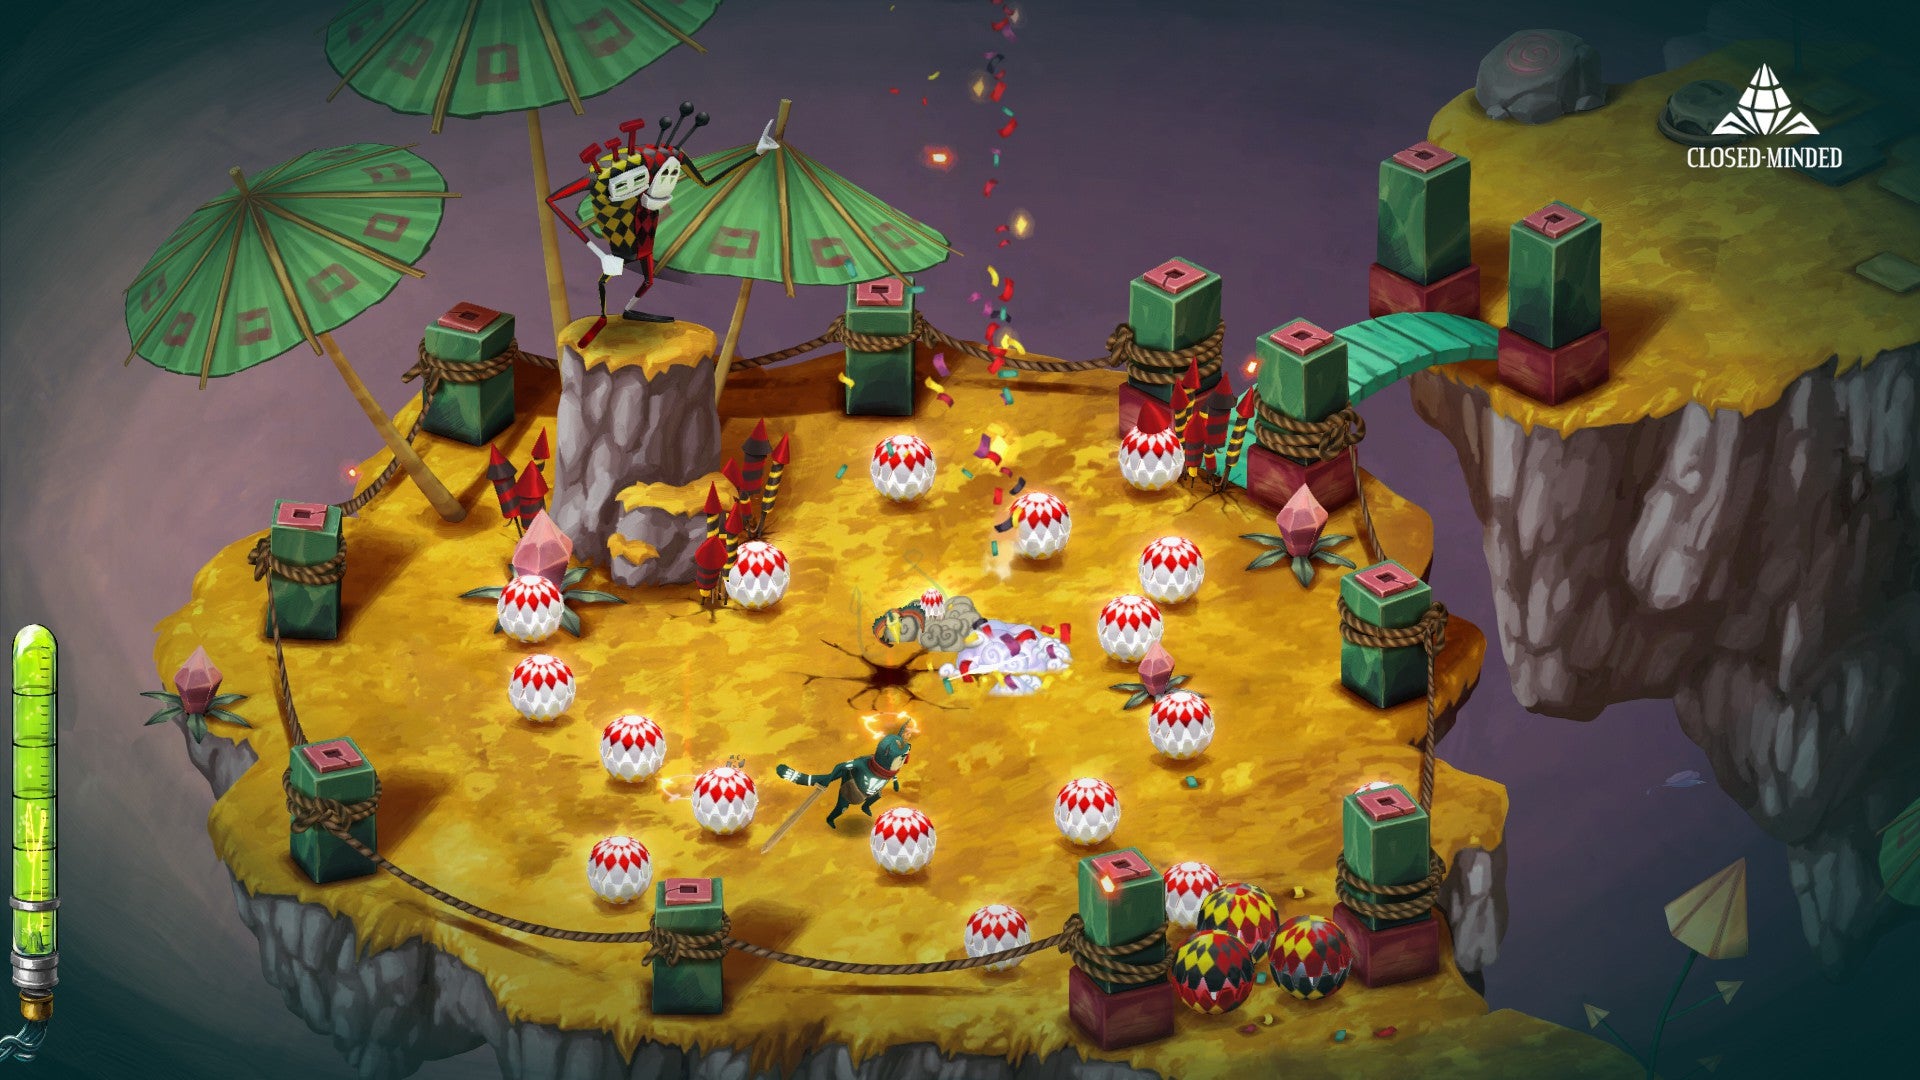 A Screenshot from Figment 2 showing Dusty avoiding exploding fireworks set off by an evil jester